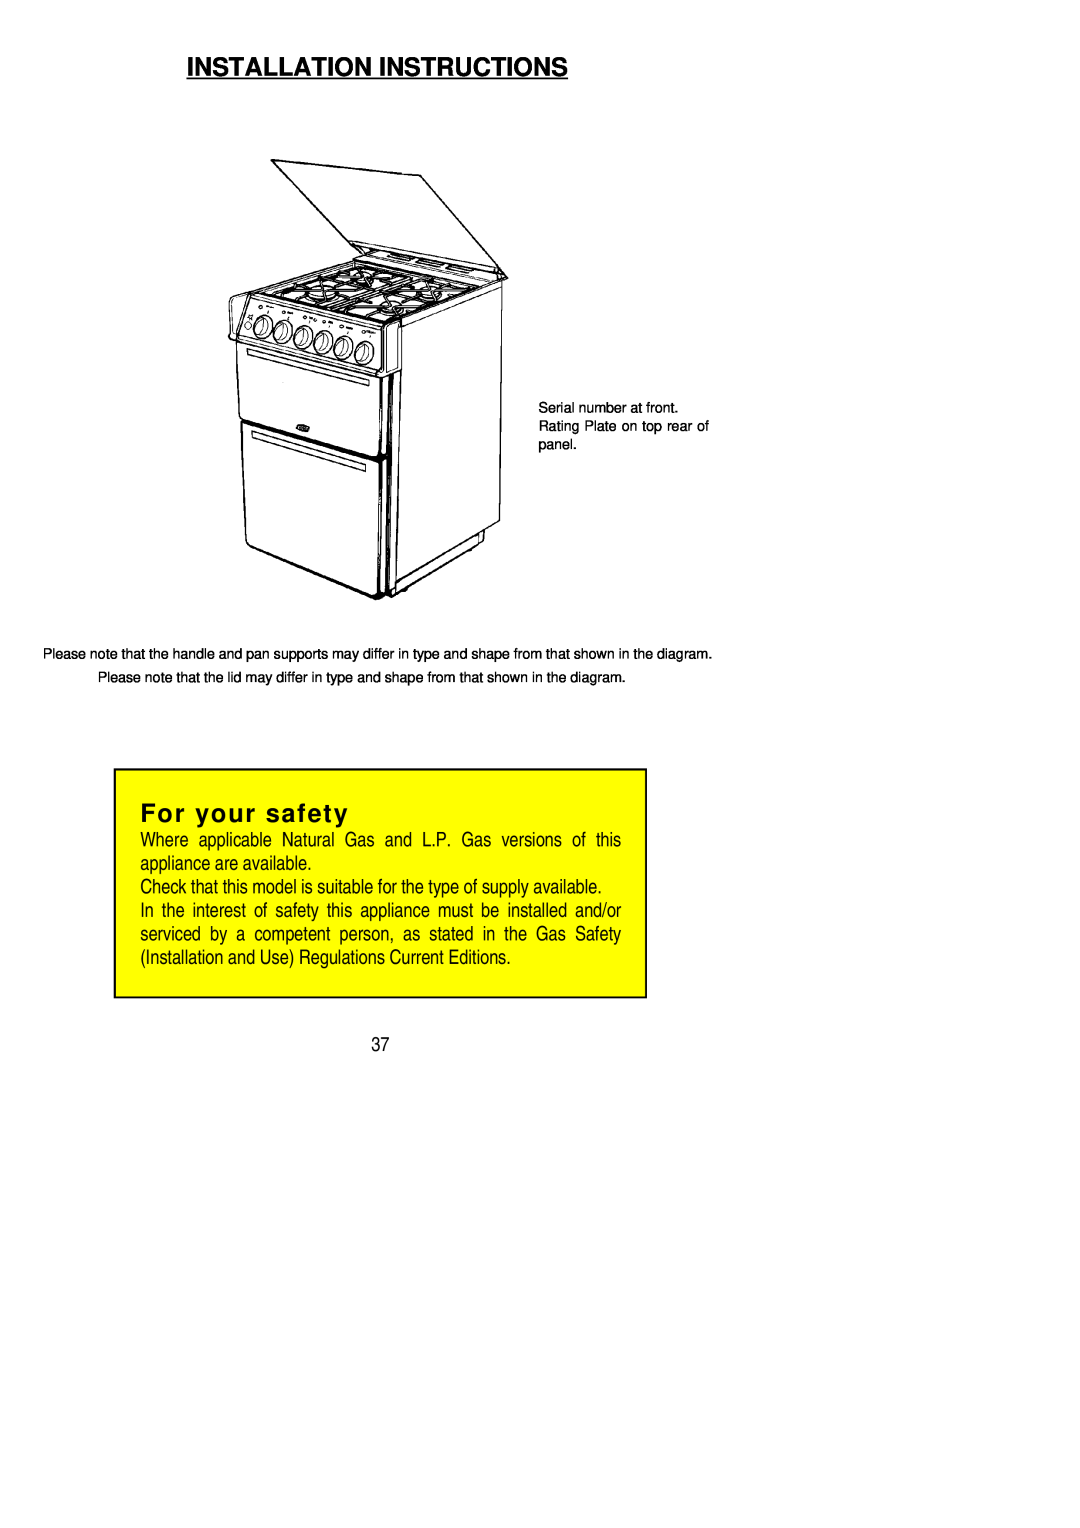 Electrolux SG 332 installation instructions Installation Instructions, For your safety 